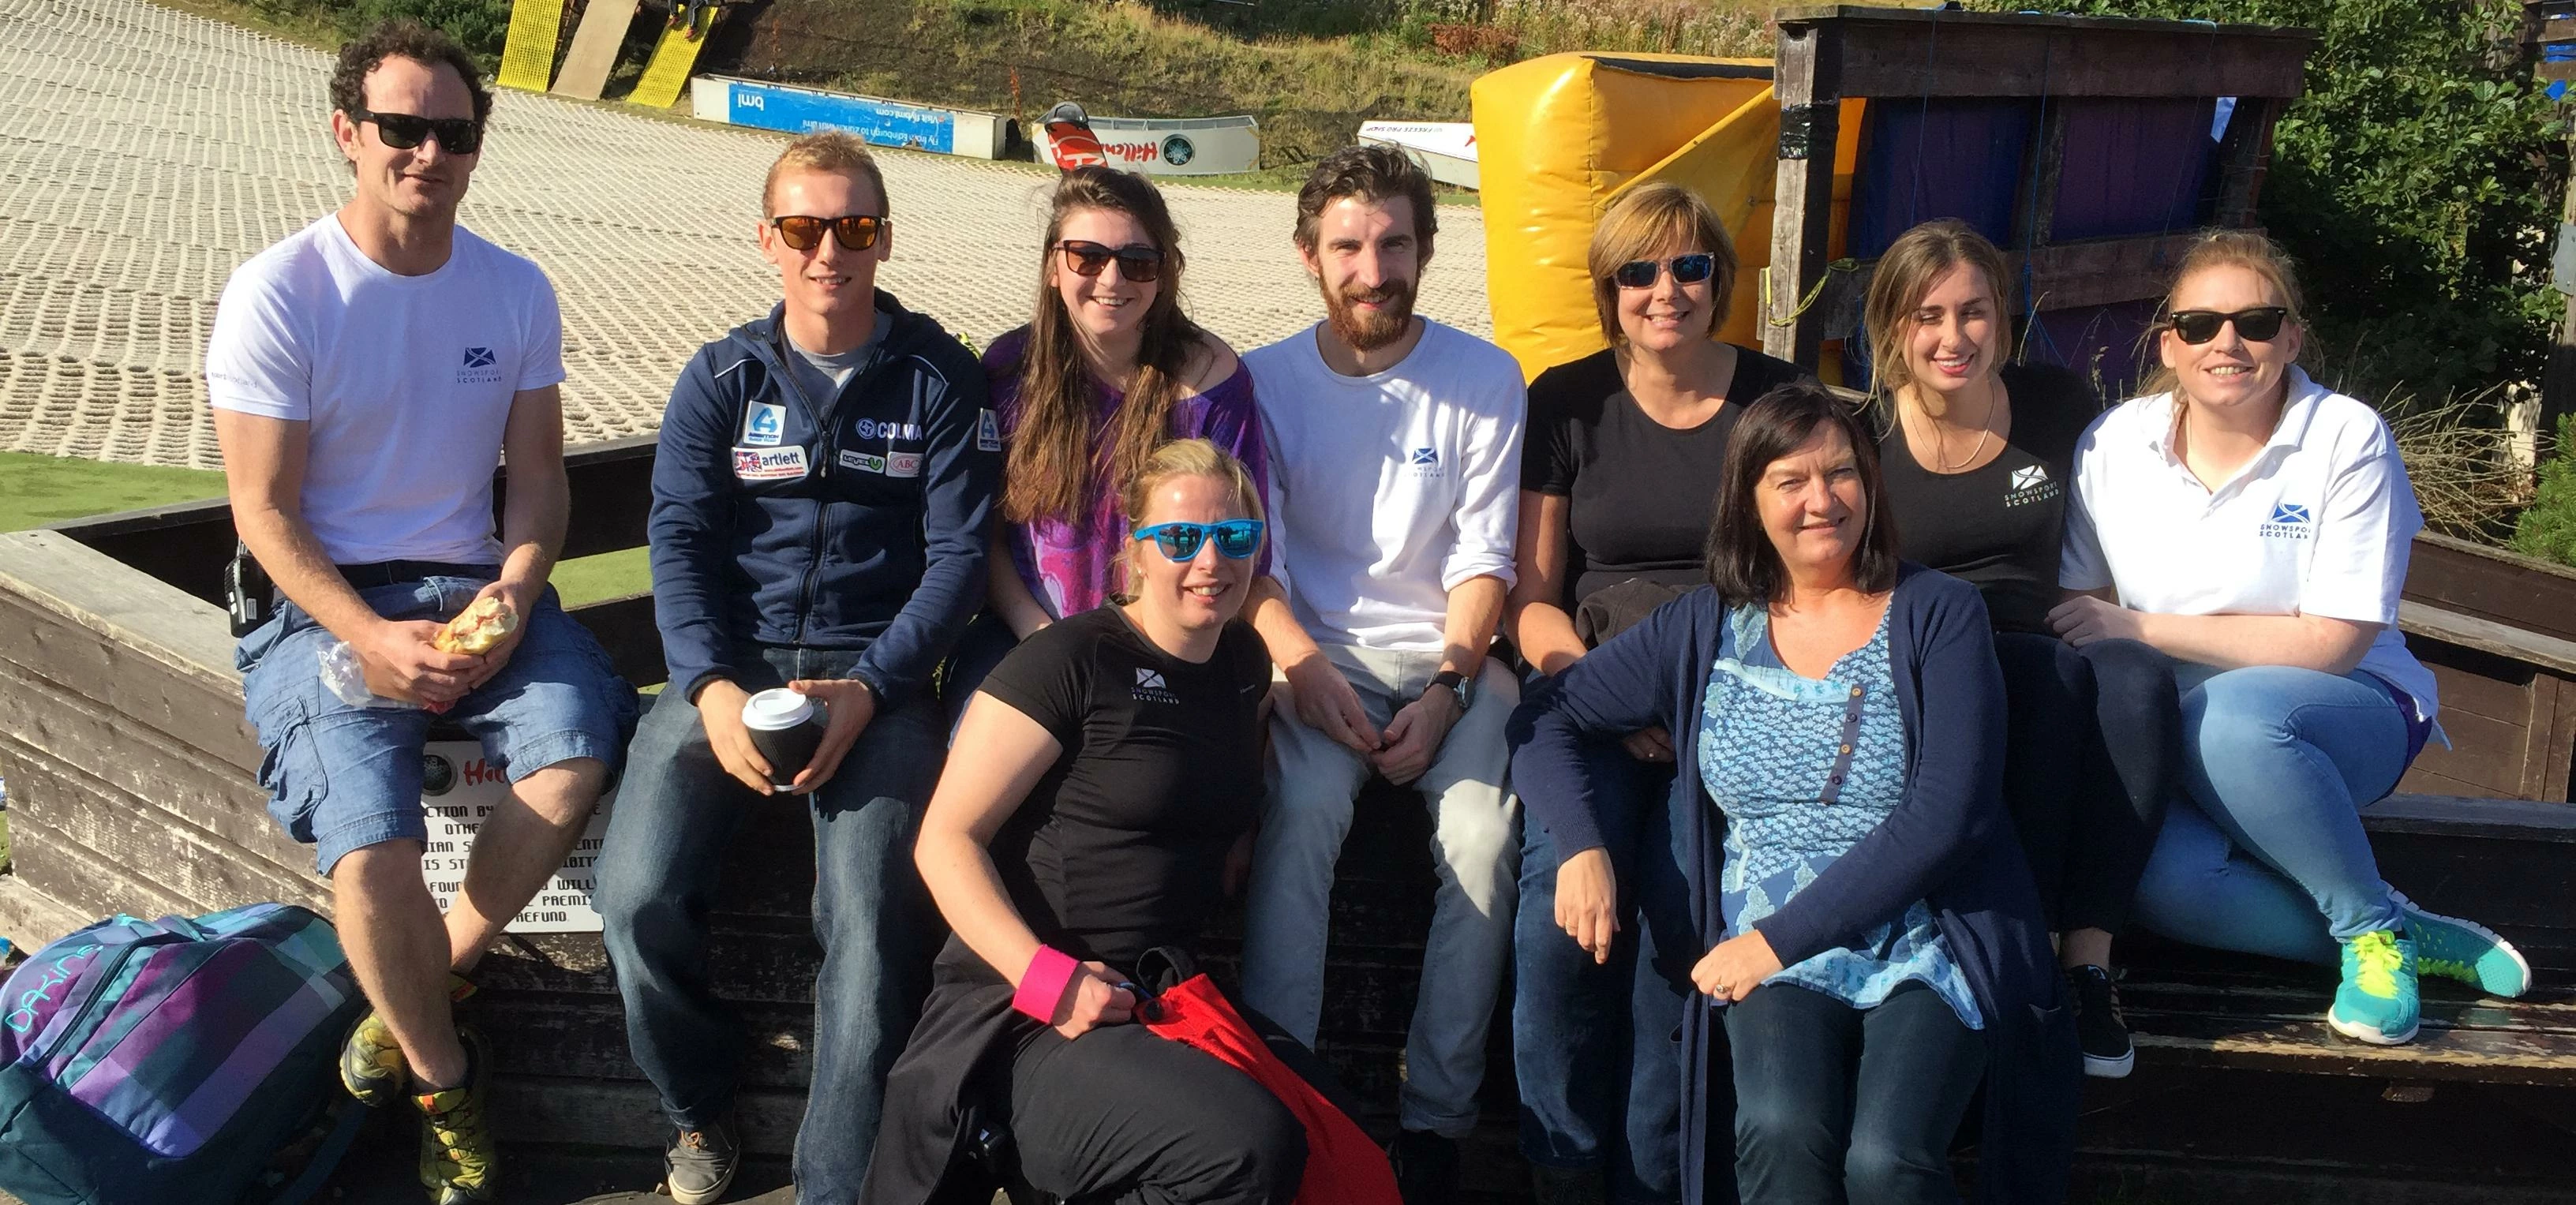 Jane (3rd from the right, back row) and some of the Snowsport Scotland team. Image credit to racer-r